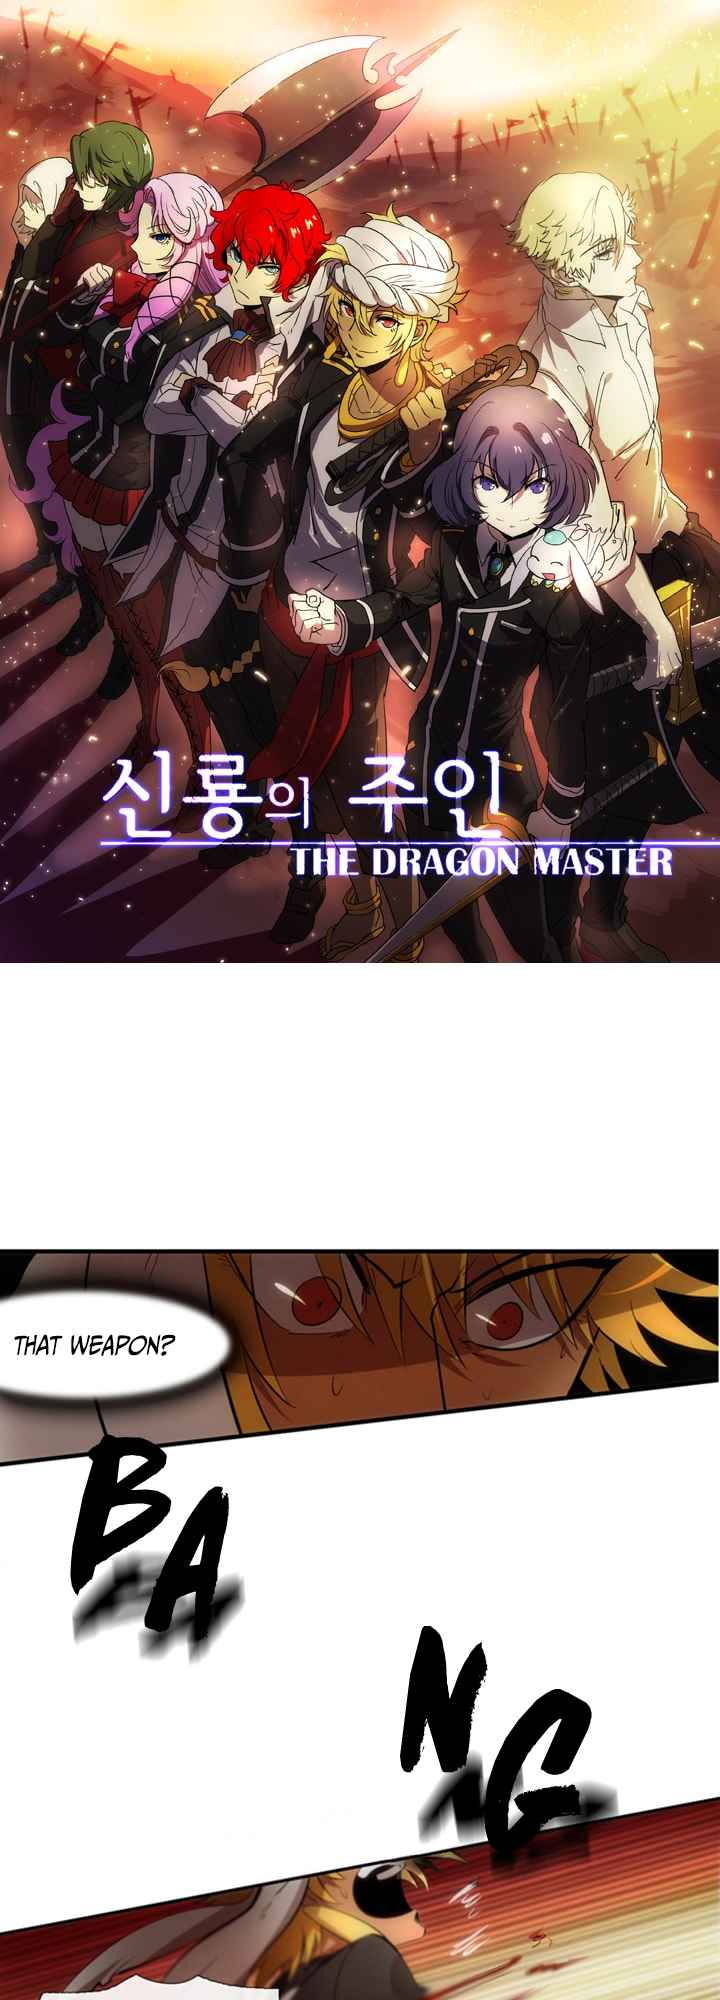 The Dragon Master - Page 2